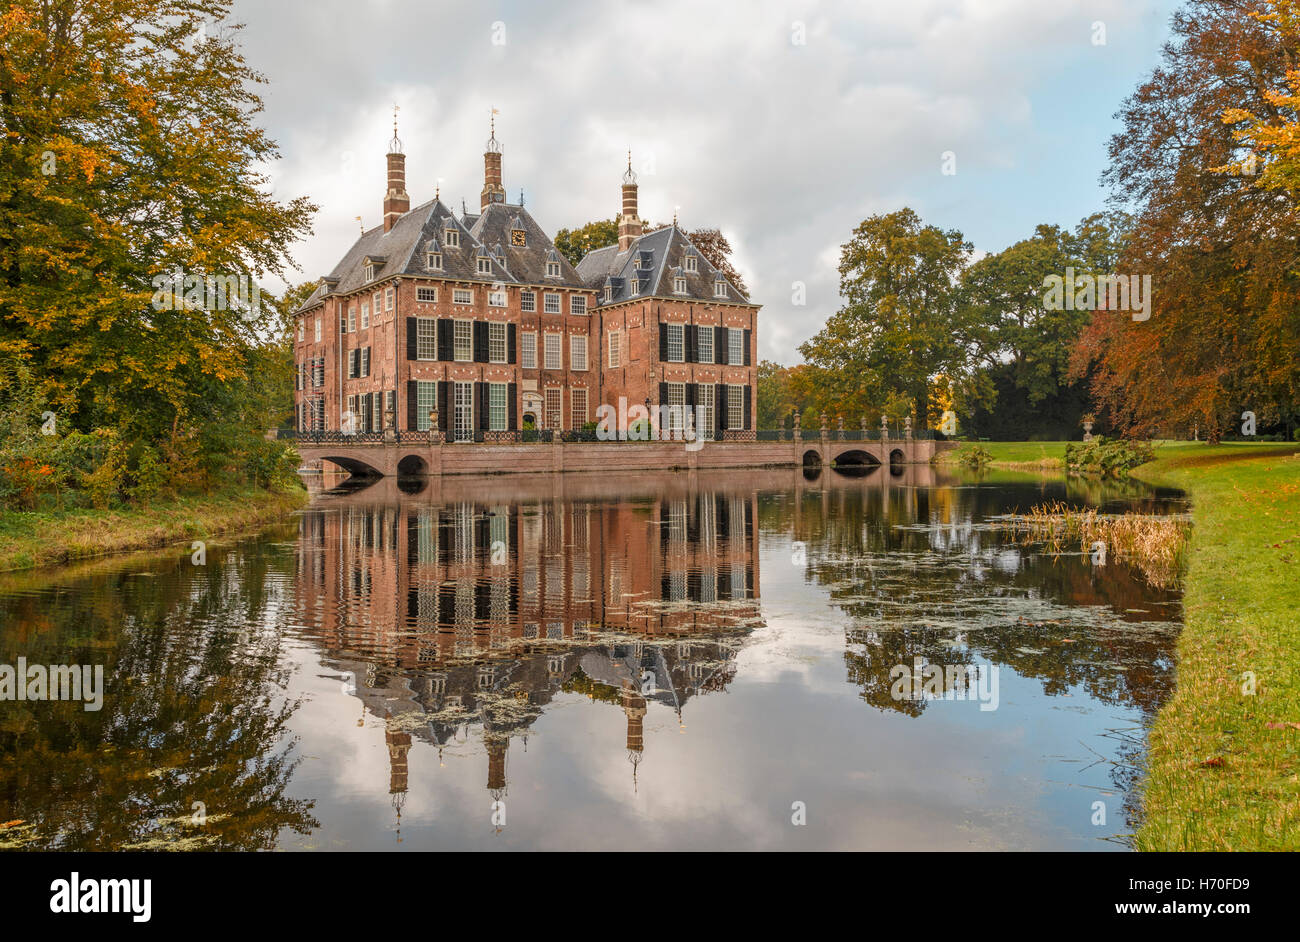 Fall colors and scenic reflections at Duivenvoorde Castle ( Kasteel Duivenvoorde ), Voorschoten, South Holland, The Netherlands. Stock Photo